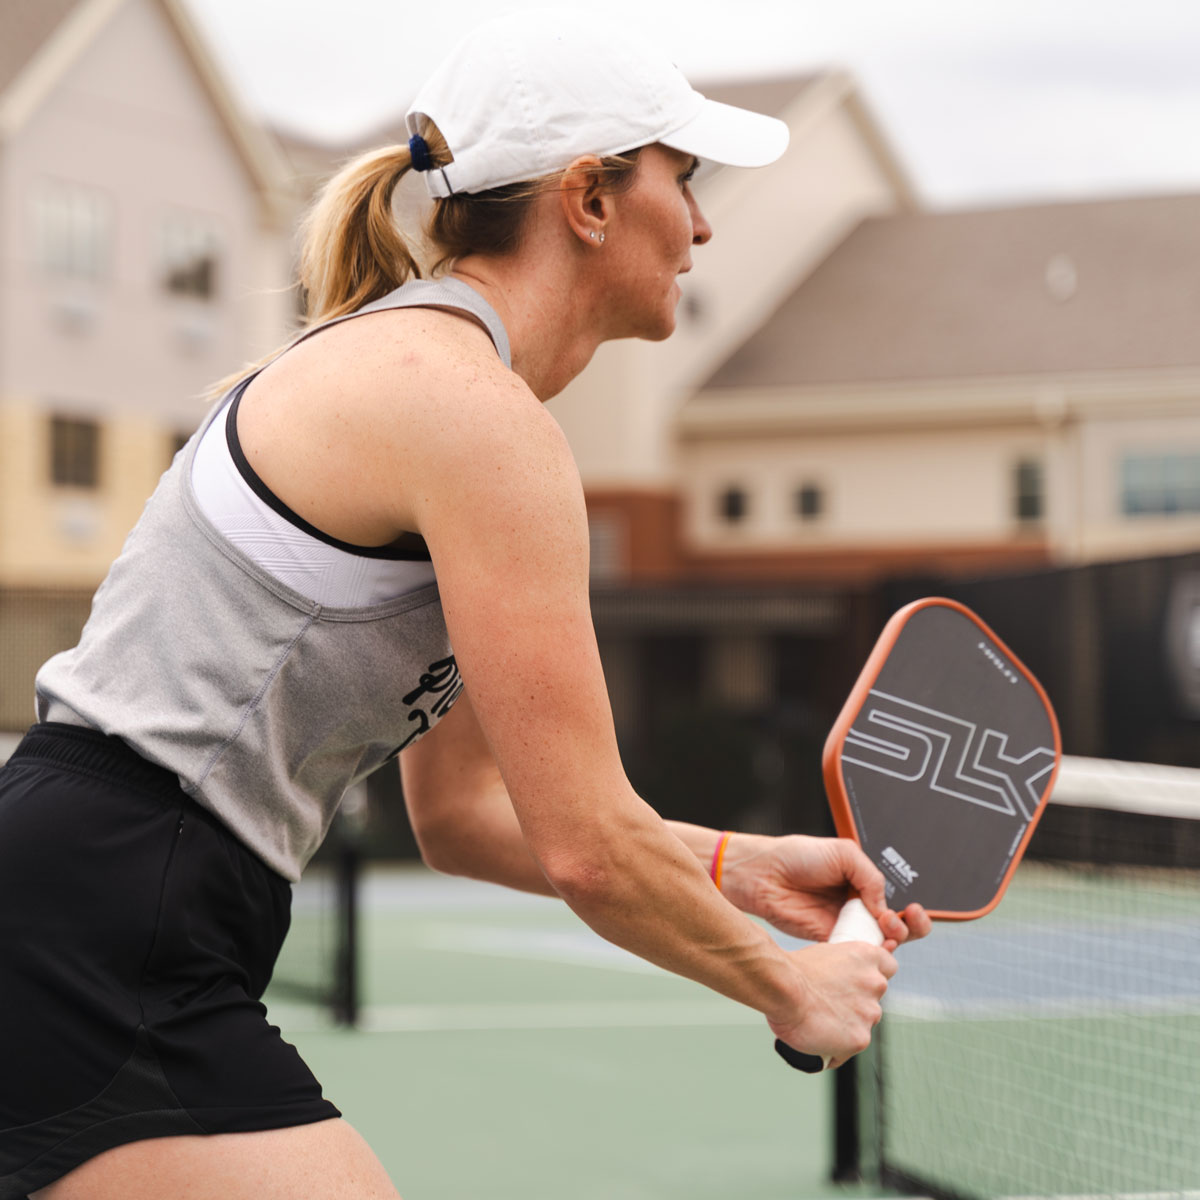 How to play Pickleball